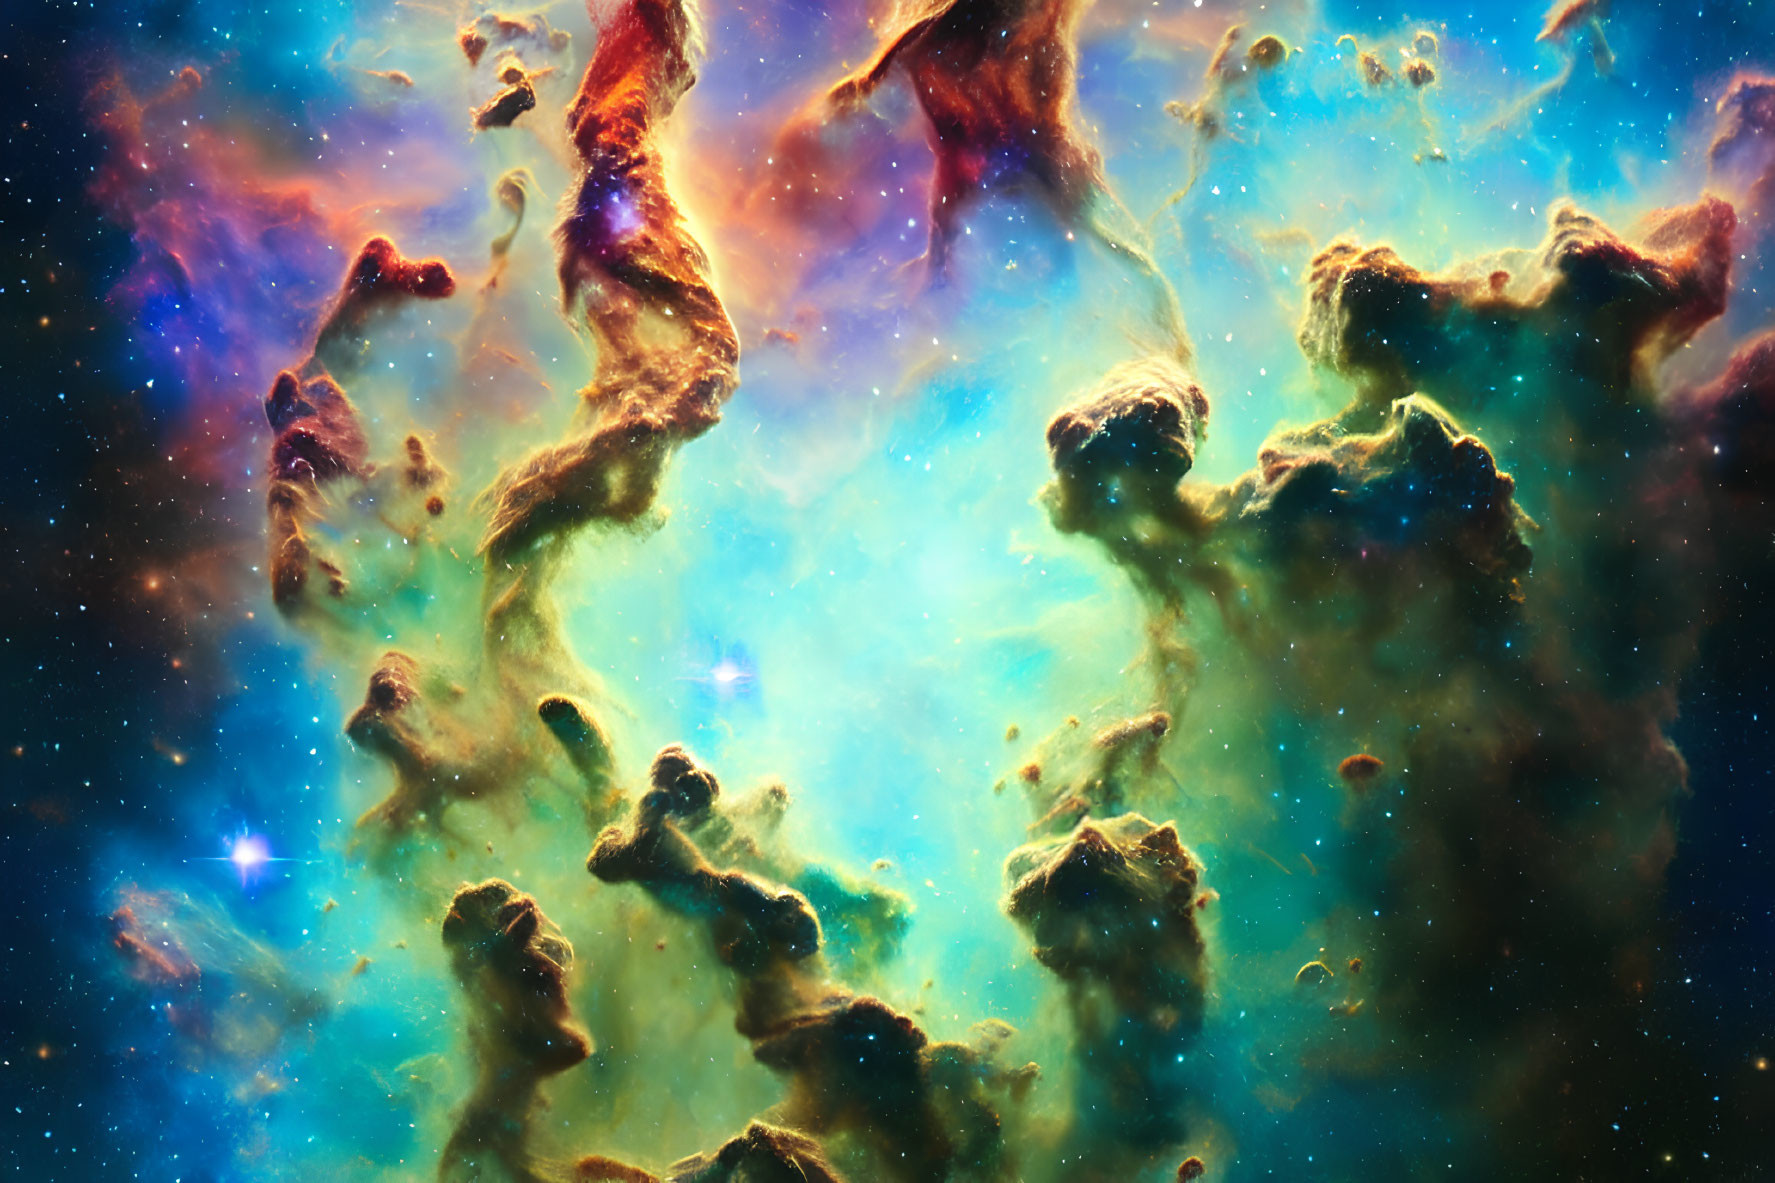 Colorful Star-Forming Nebulae and Dust Clouds in Cosmic Scene